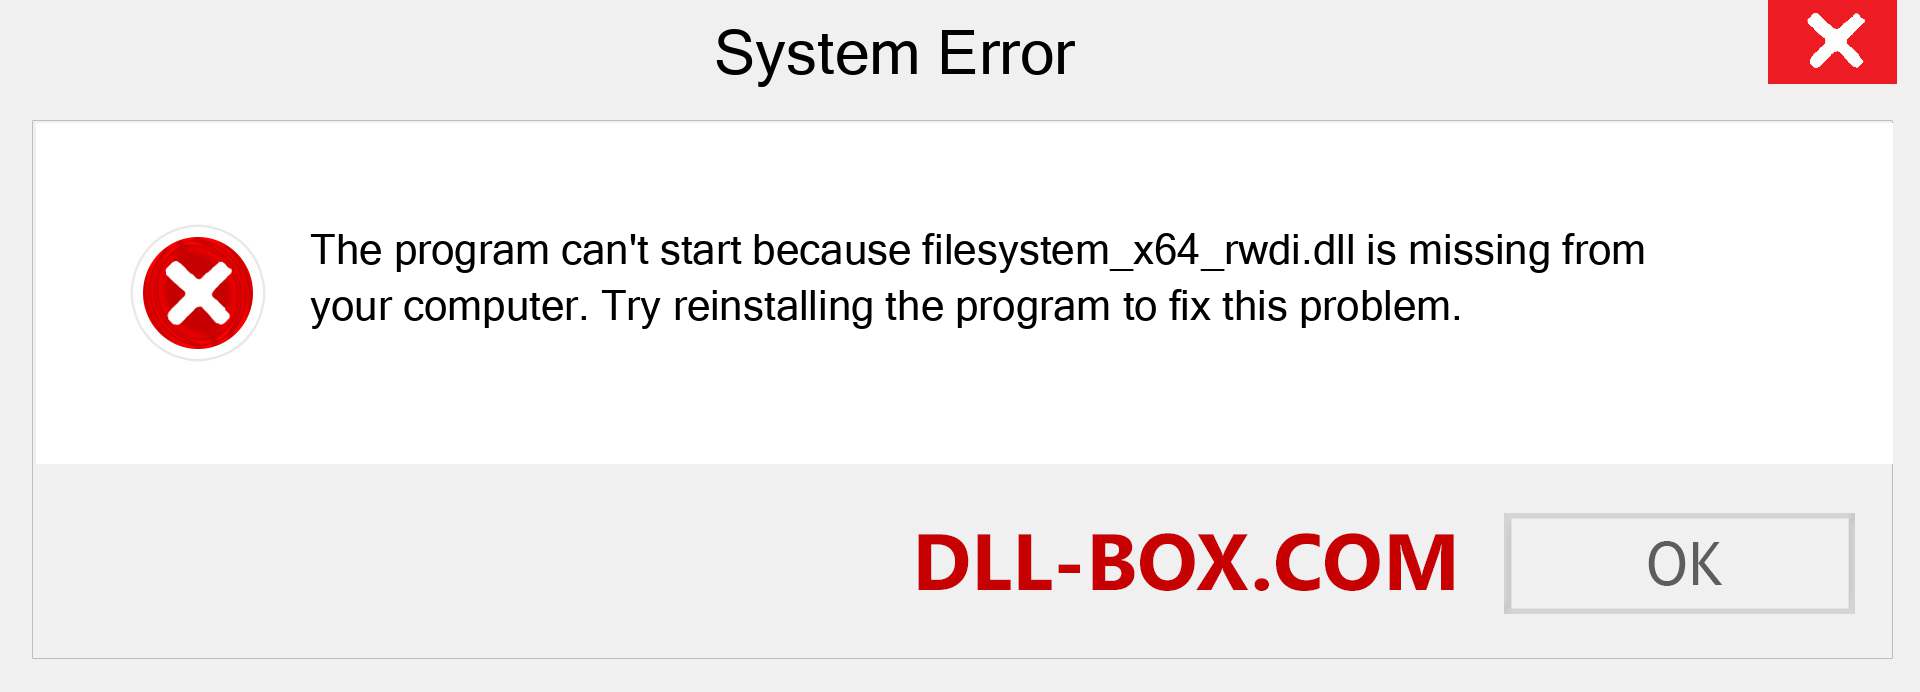  filesystem_x64_rwdi.dll file is missing?. Download for Windows 7, 8, 10 - Fix  filesystem_x64_rwdi dll Missing Error on Windows, photos, images